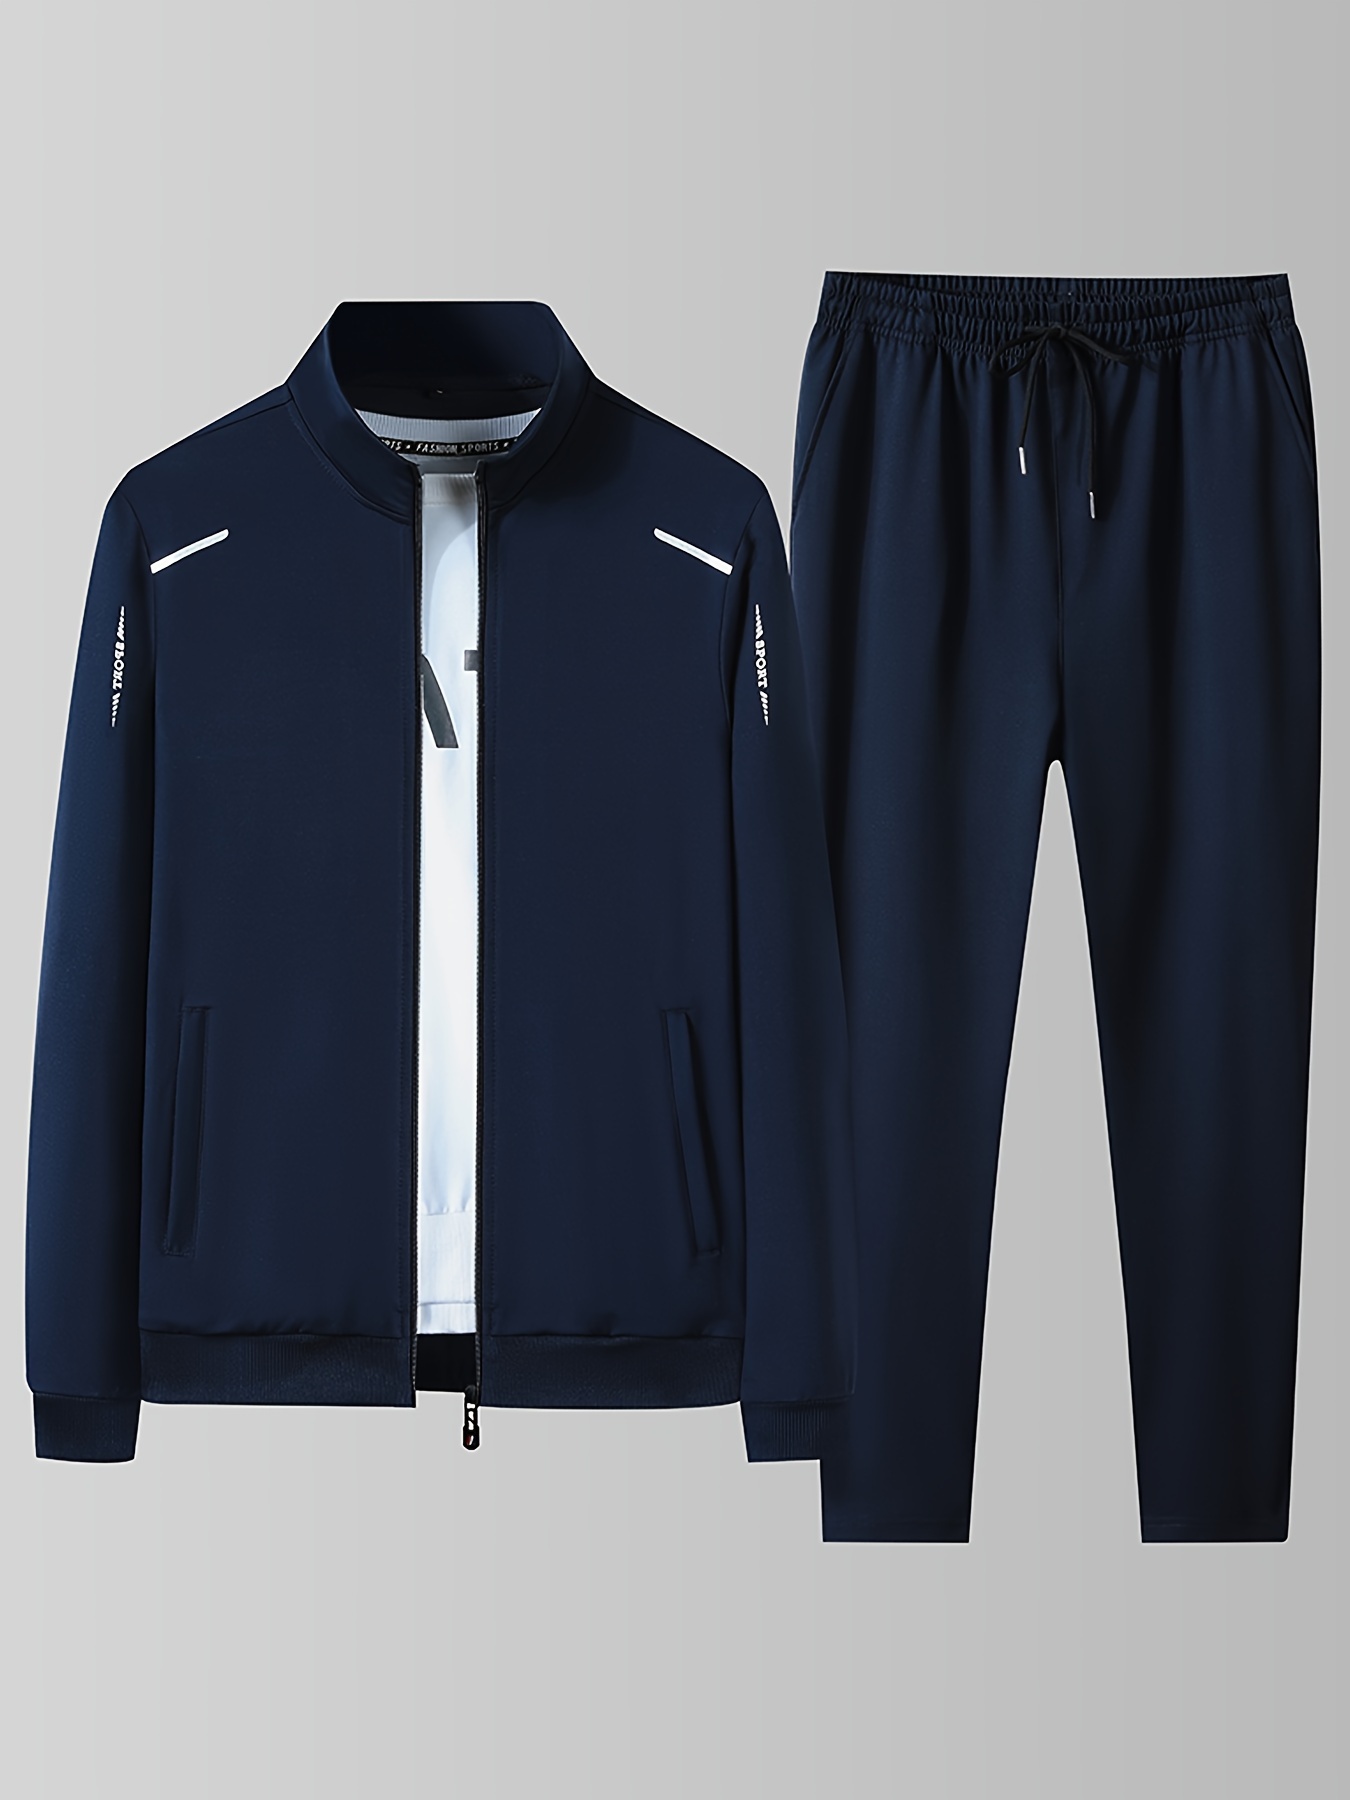 mens athletic tracksuit solid color zip up stand collar jacket and casual loose comfy pants sets